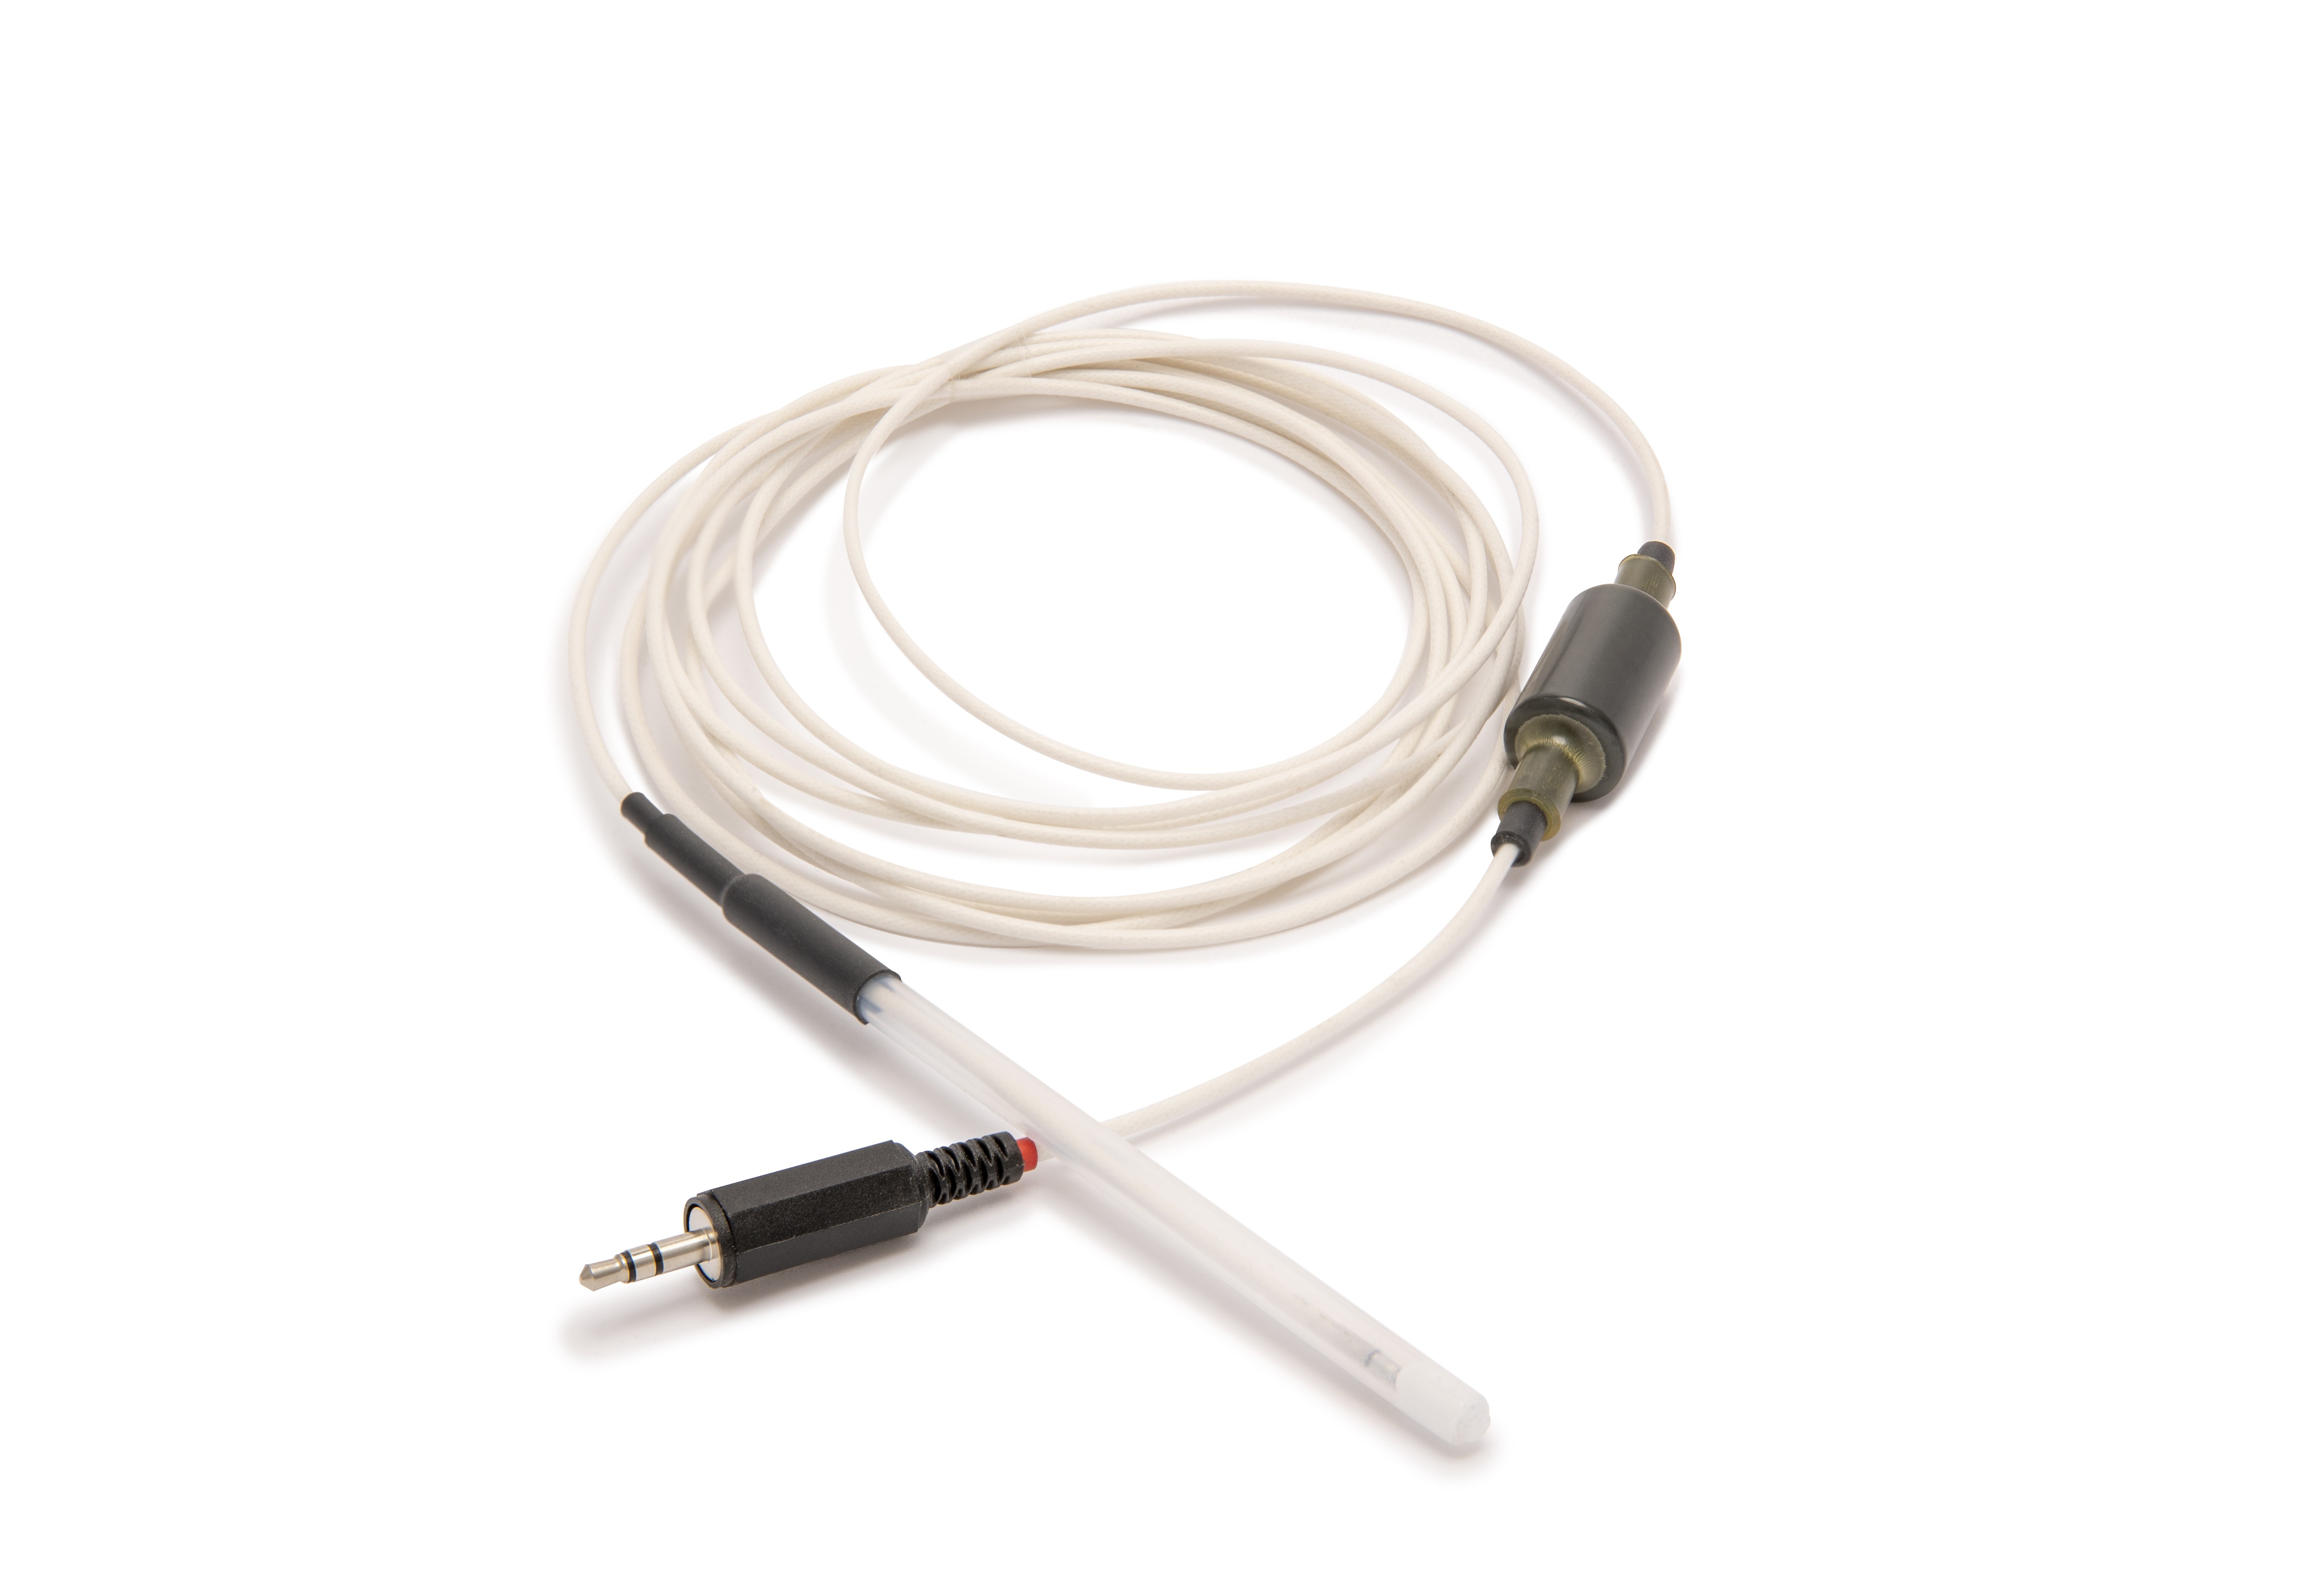 TXPEP - Grant Instruments Flexible External Temperature Probe For Monitoring And Controlling Temperature Of Remote Loads